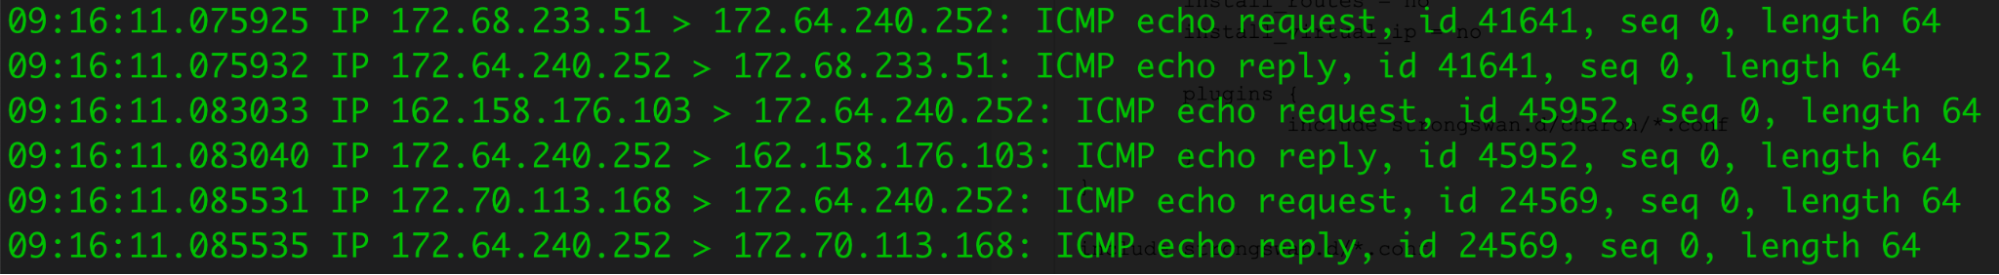 If you run tcpdump on vti0 you can check for decrypted packets